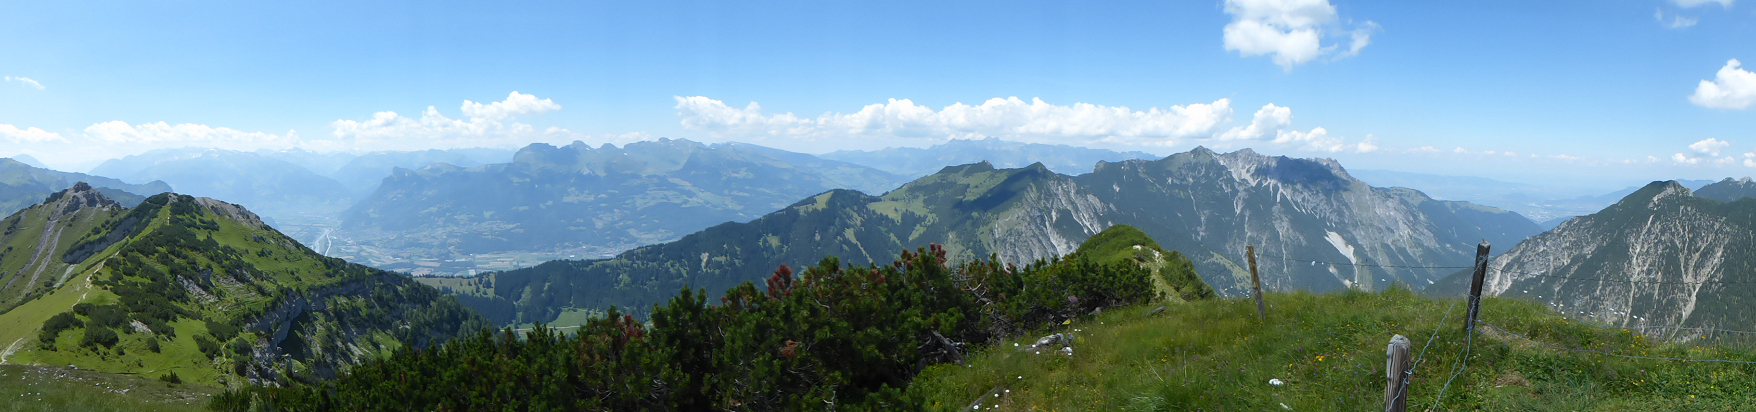 Panorama - View from Schönberg in direction to the Rhine and the mountain range from Helwangspitz to Drei Schwestern